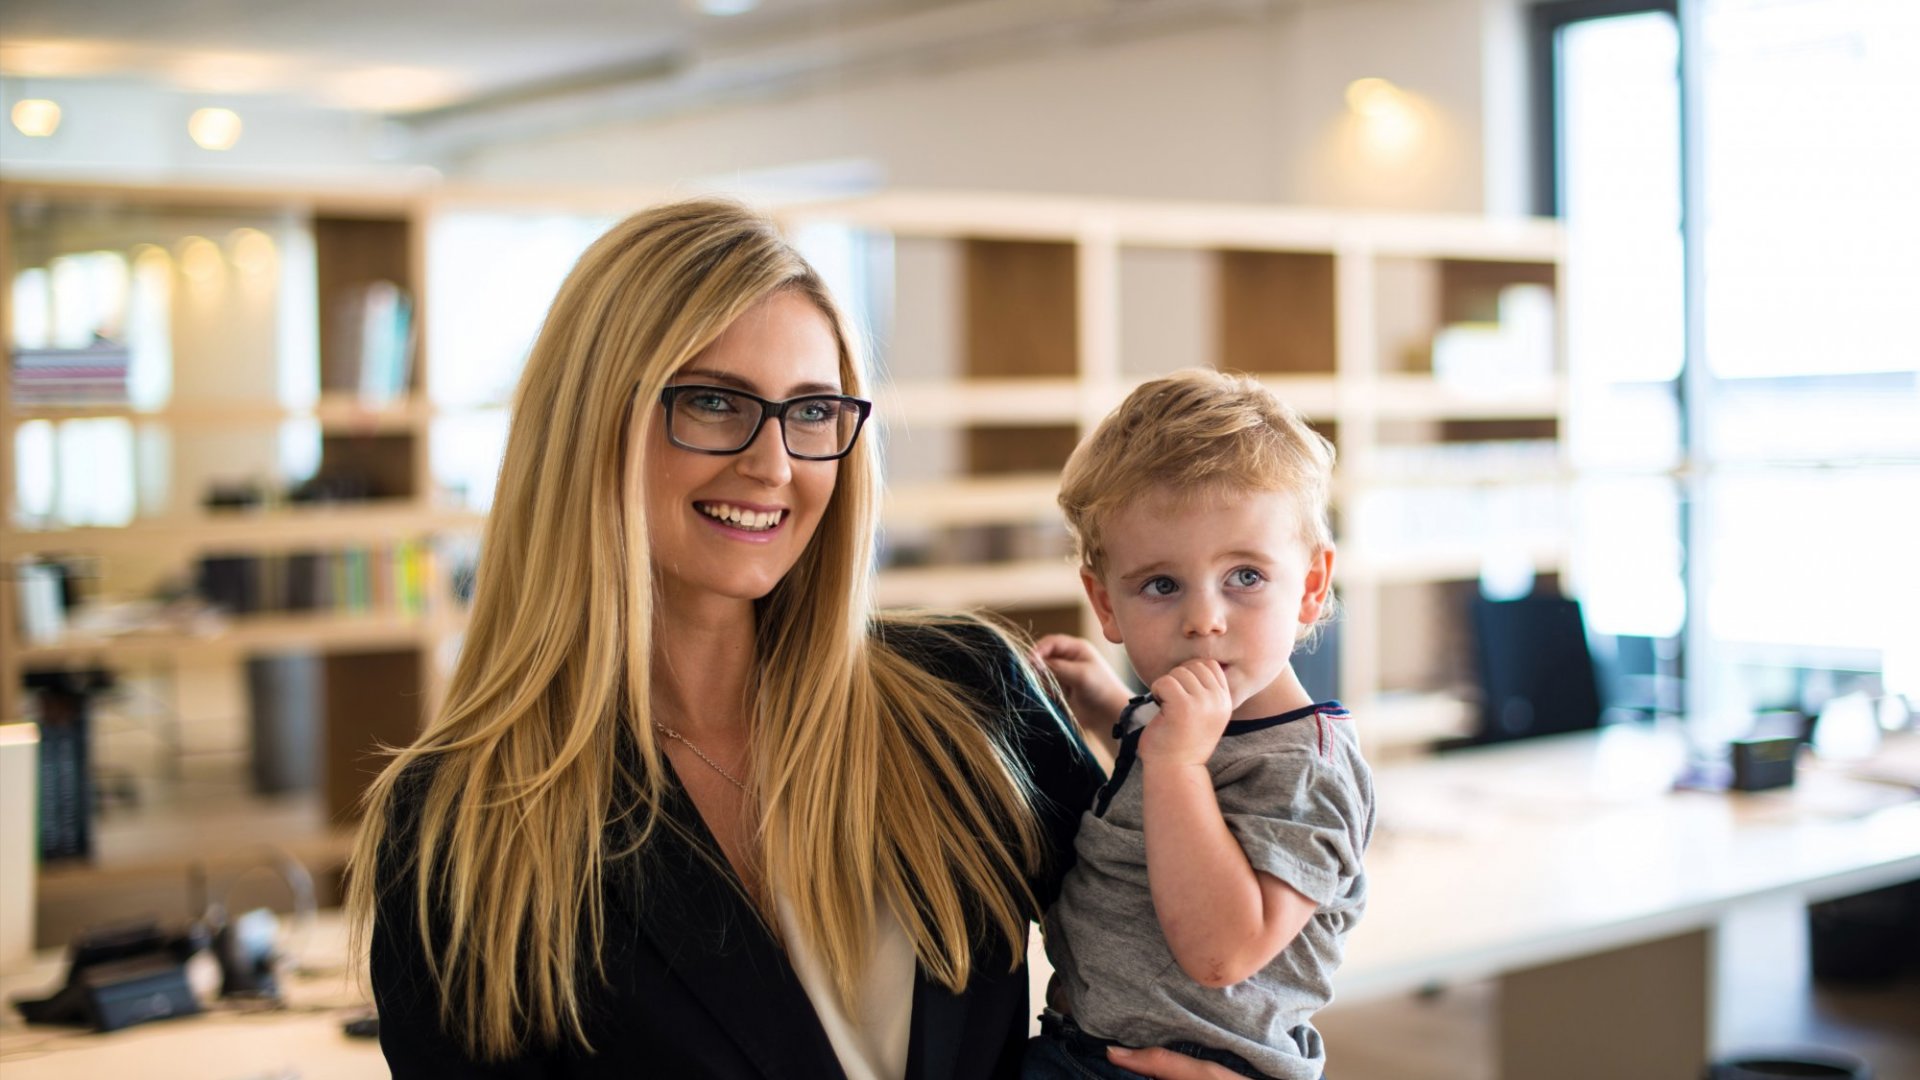 7 productivity tips for working mothers